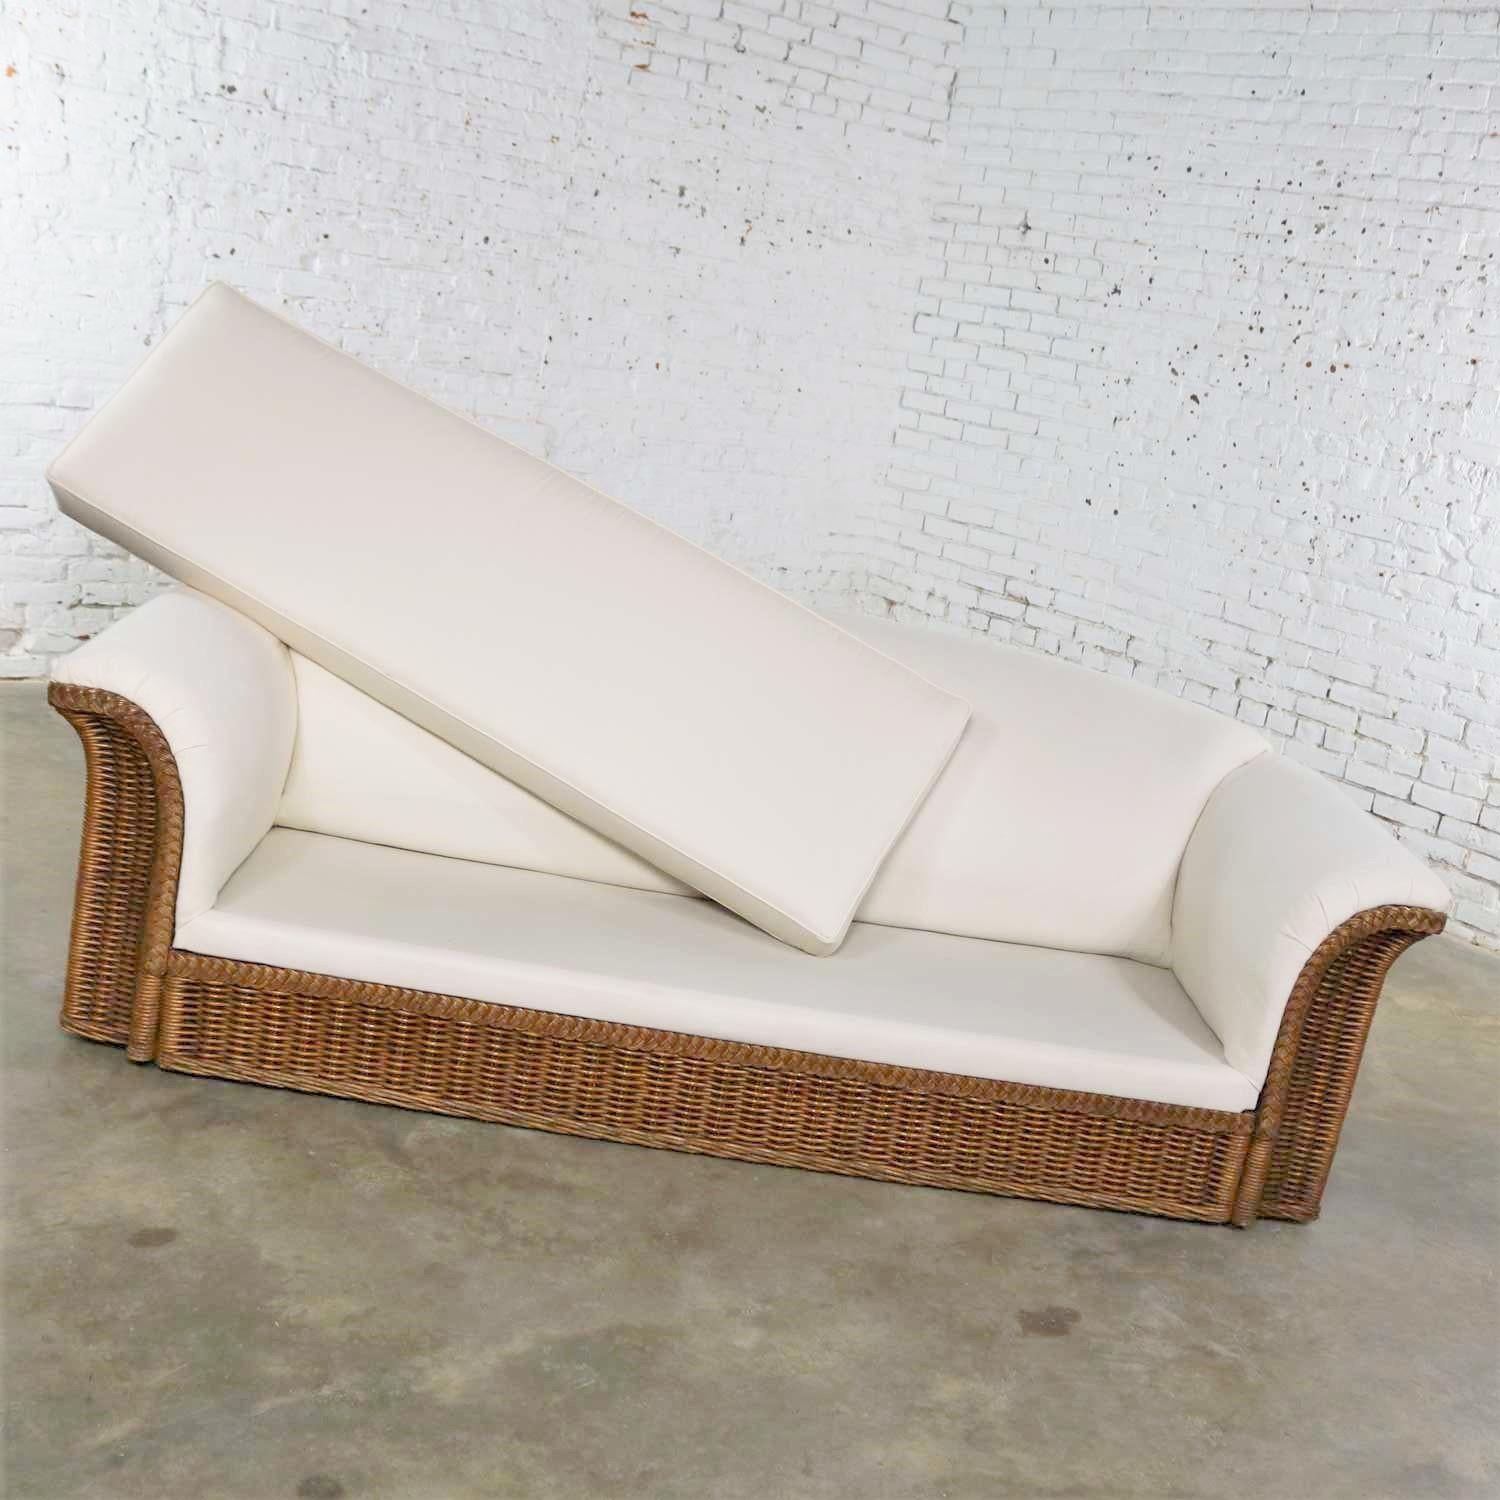 Vintage Modern Wicker Sofa Manner Michael Taylor in New White Canvas 5